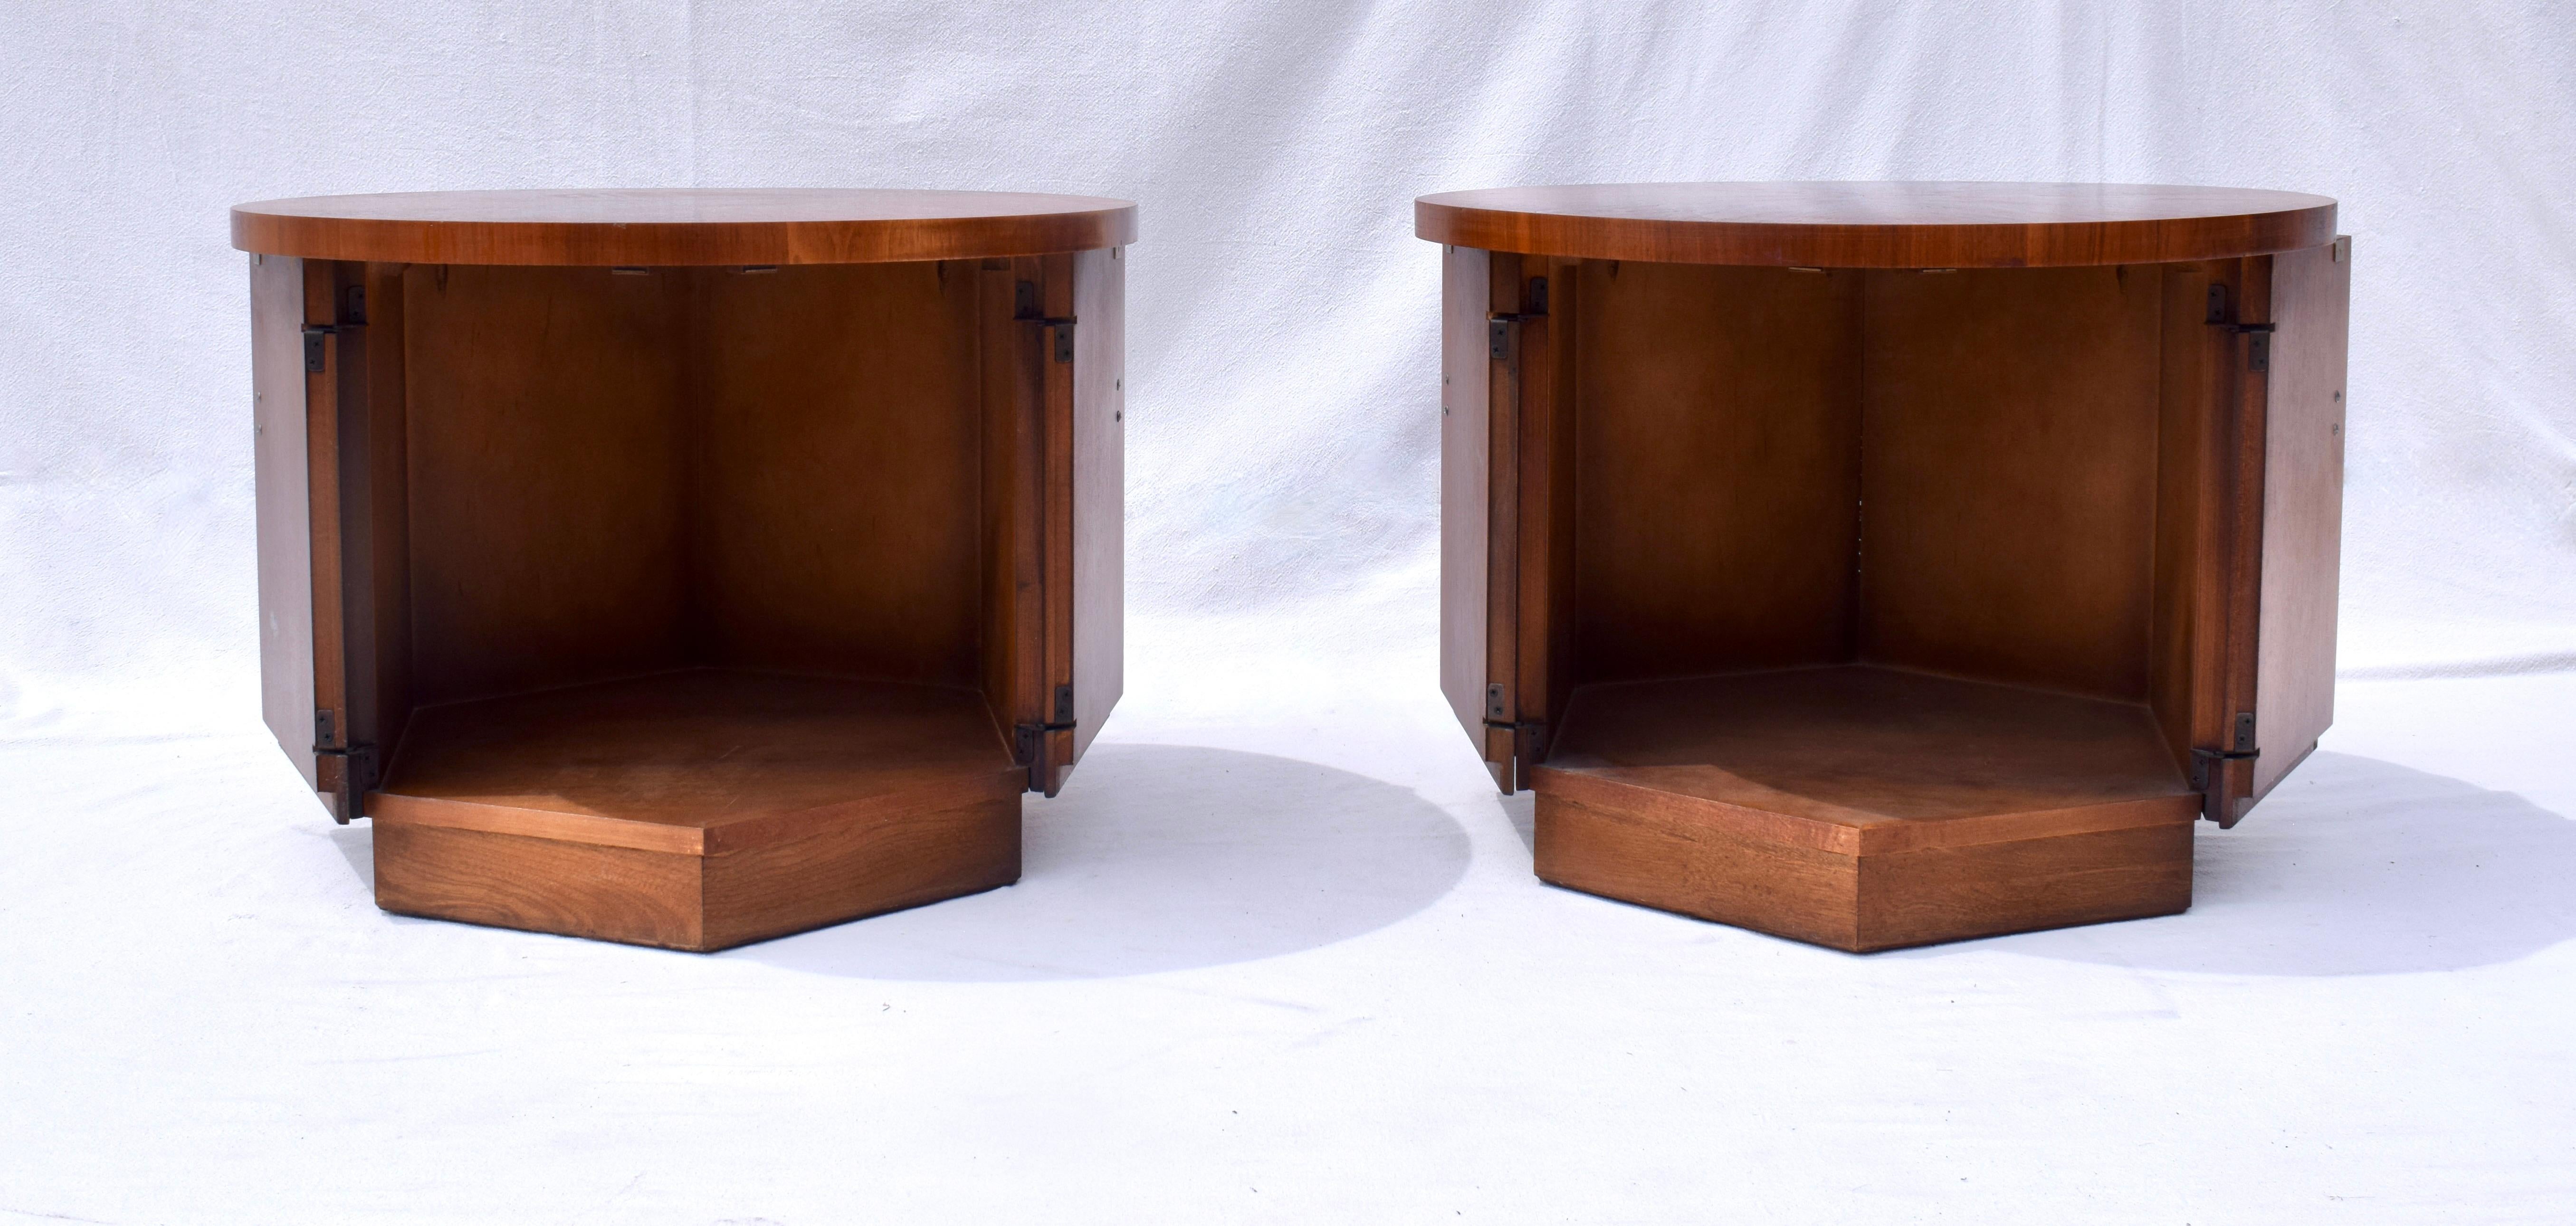 Pair of Mid-Century Modern Hexagonal end side table cabinets by Lane Furniture featuring gorgeous  book matched tops with vibrant walnut grains and two doors allowing for generous storage.